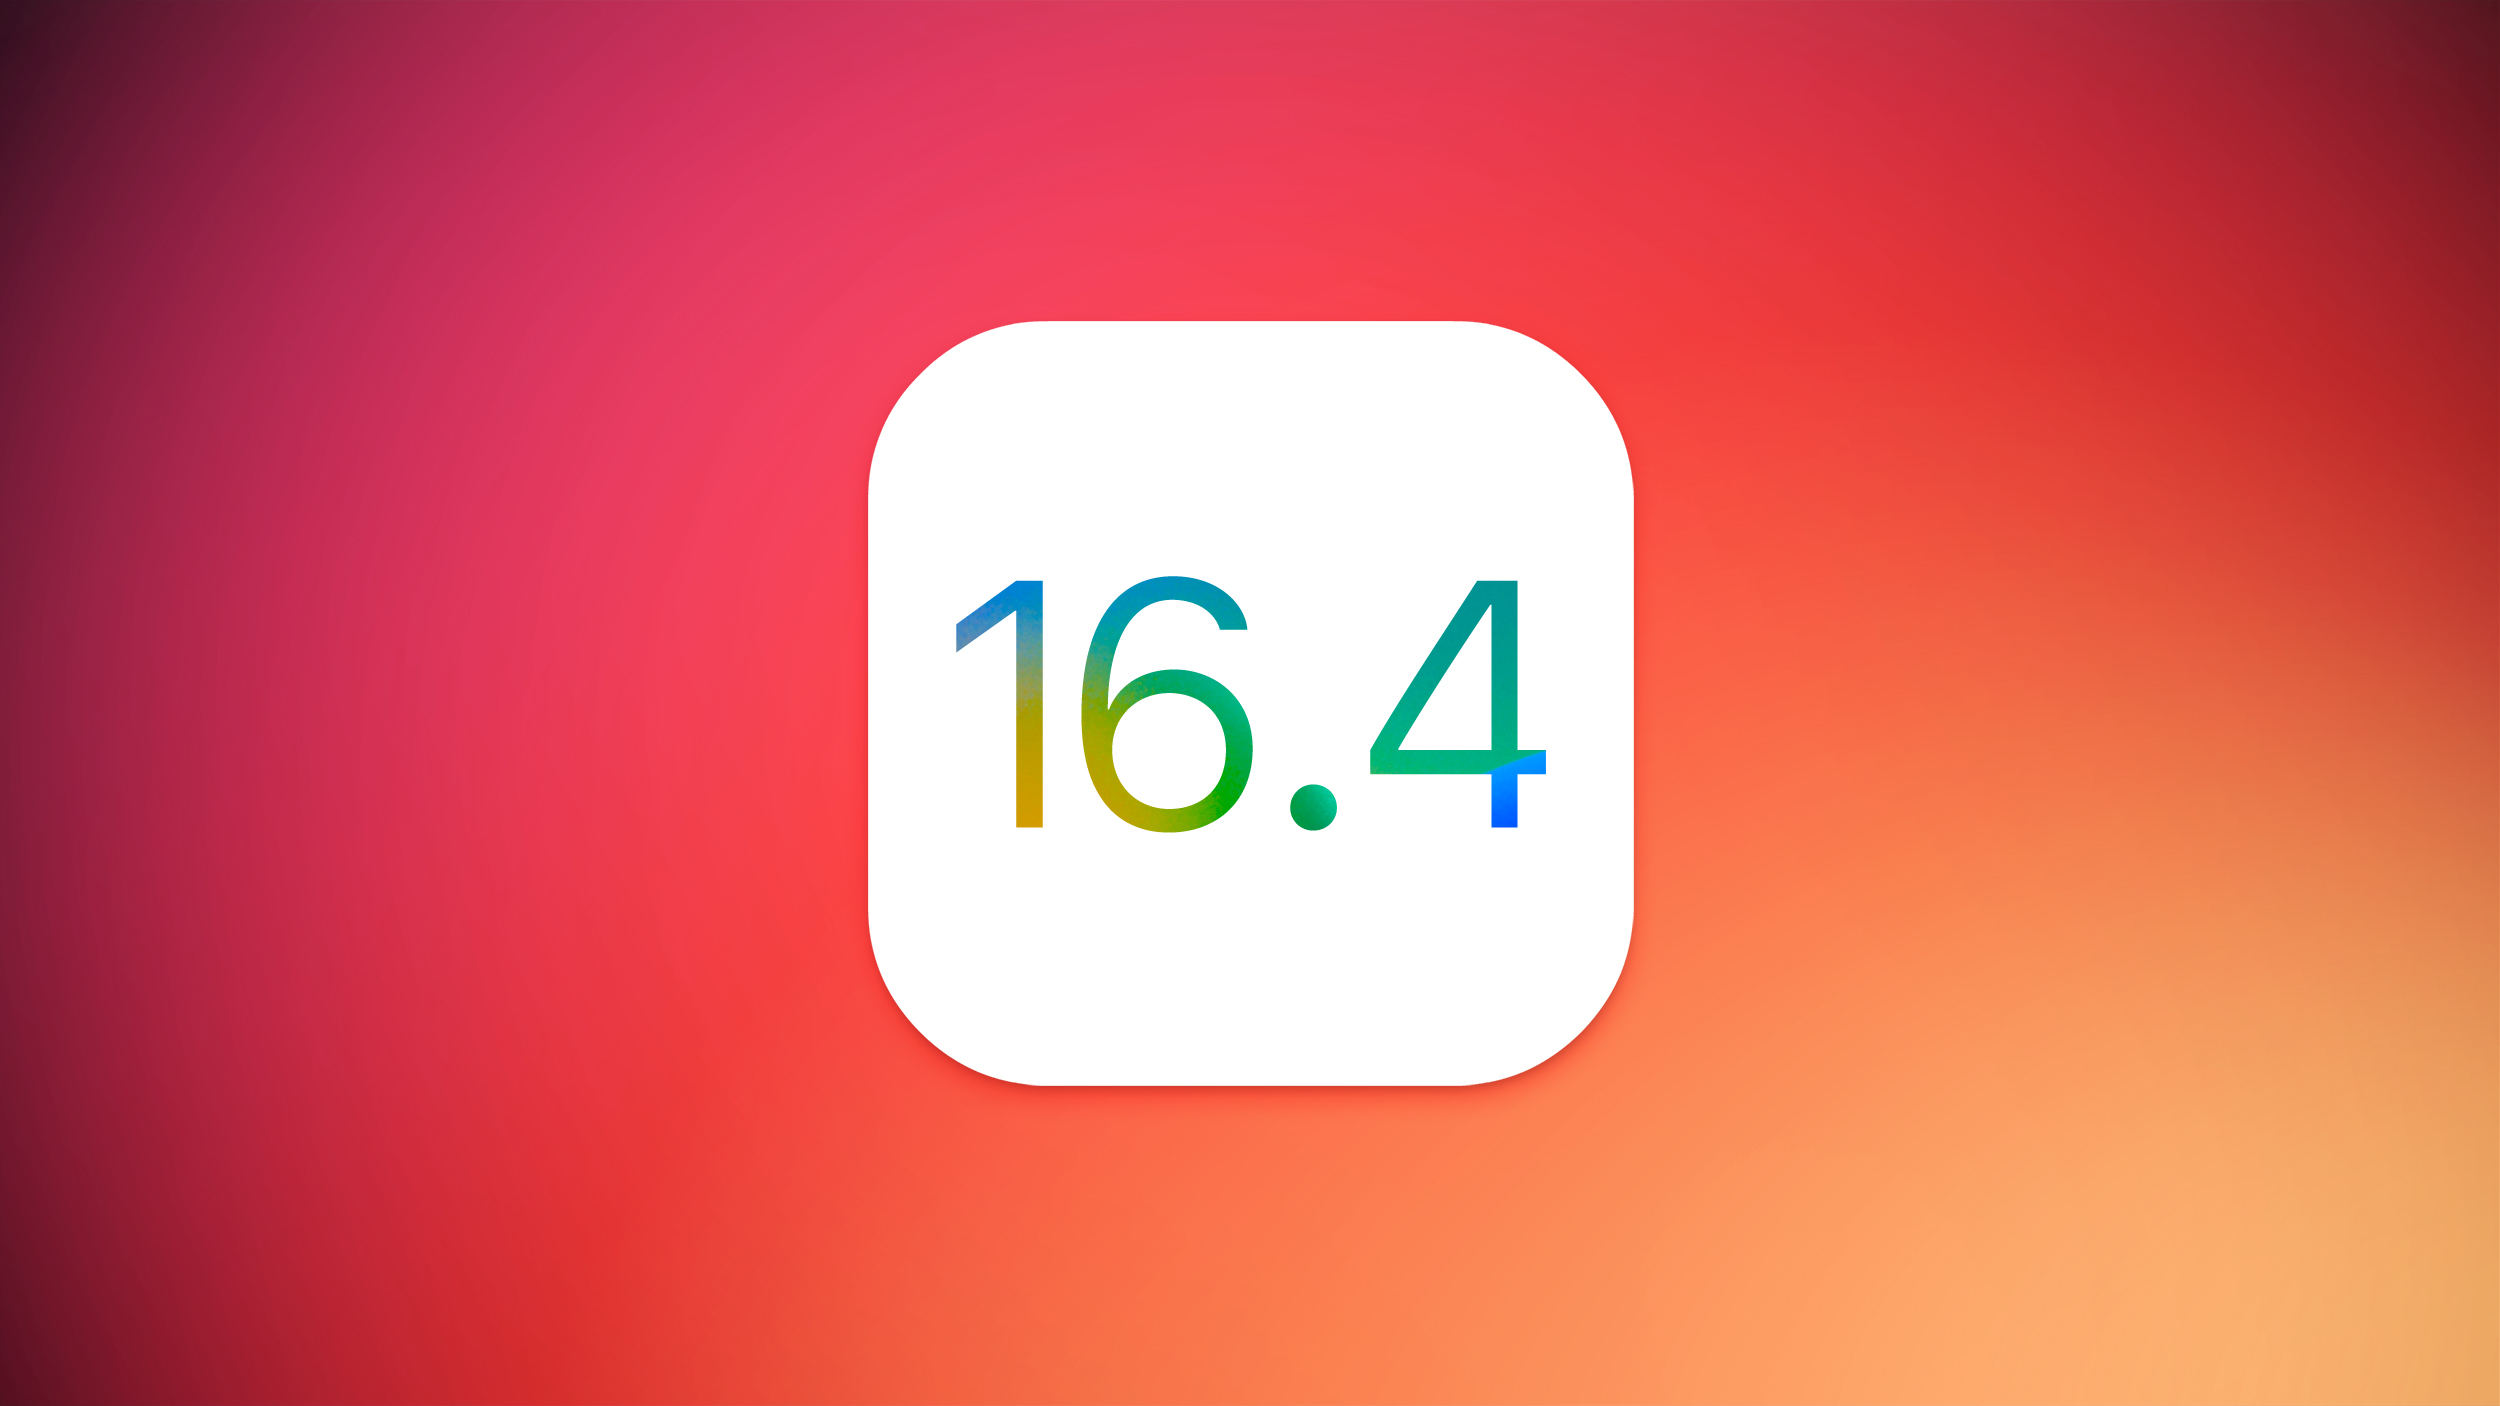 Apple Releases Second Public Betas of iOS 16.4 and iPadOS 16.4 With New Emoji, Safari Web Push Notifications, HomeKit Update and More